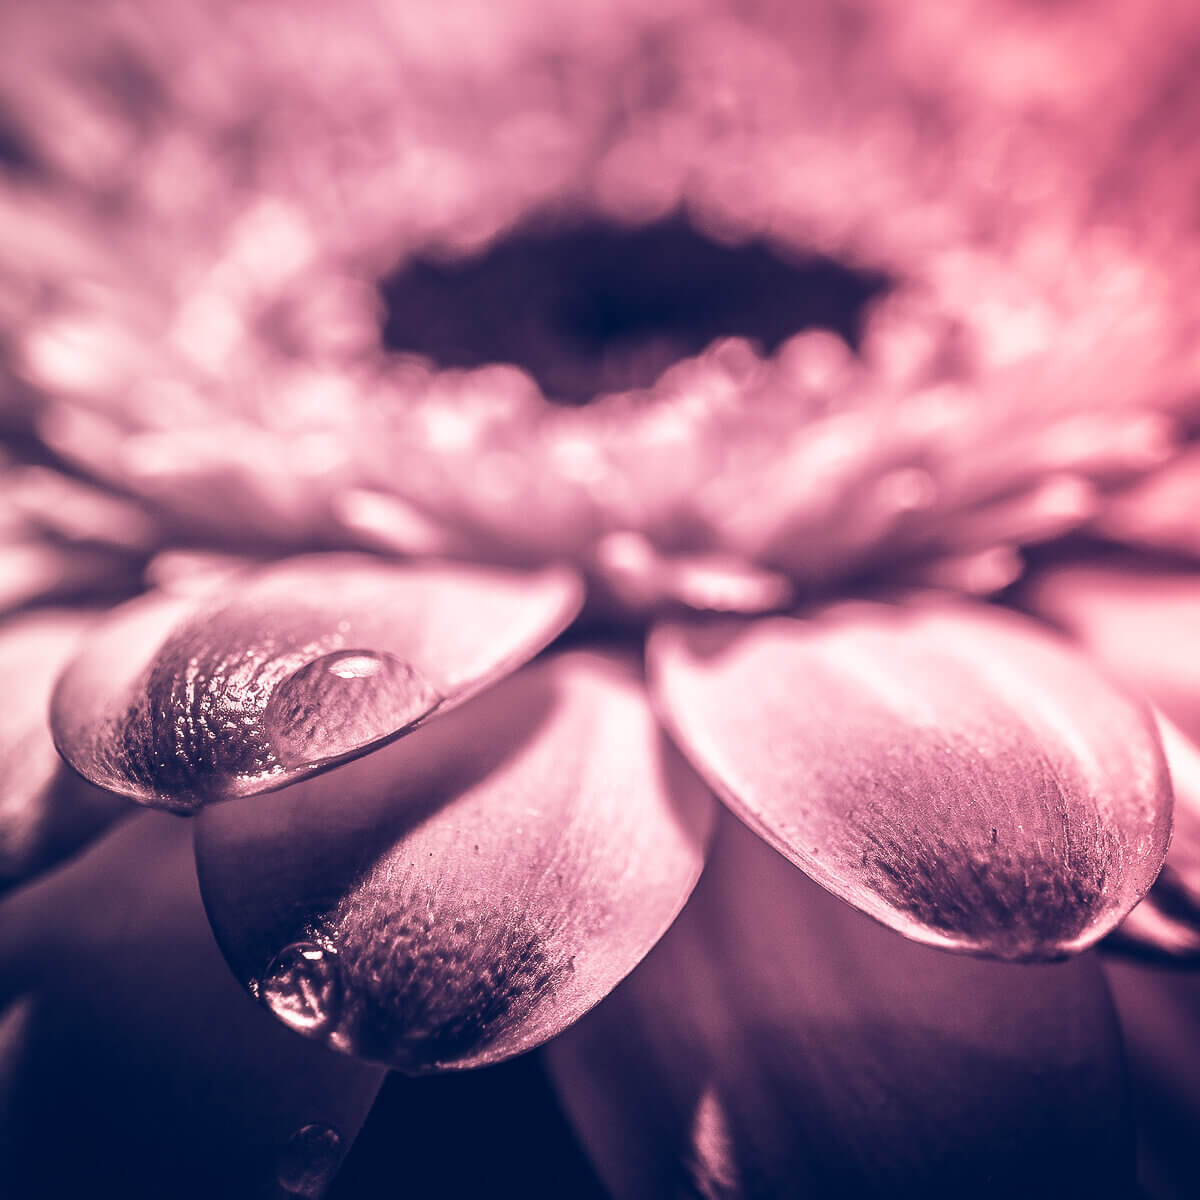 closeup droplet on a pink flower, only1andywright photography stands out